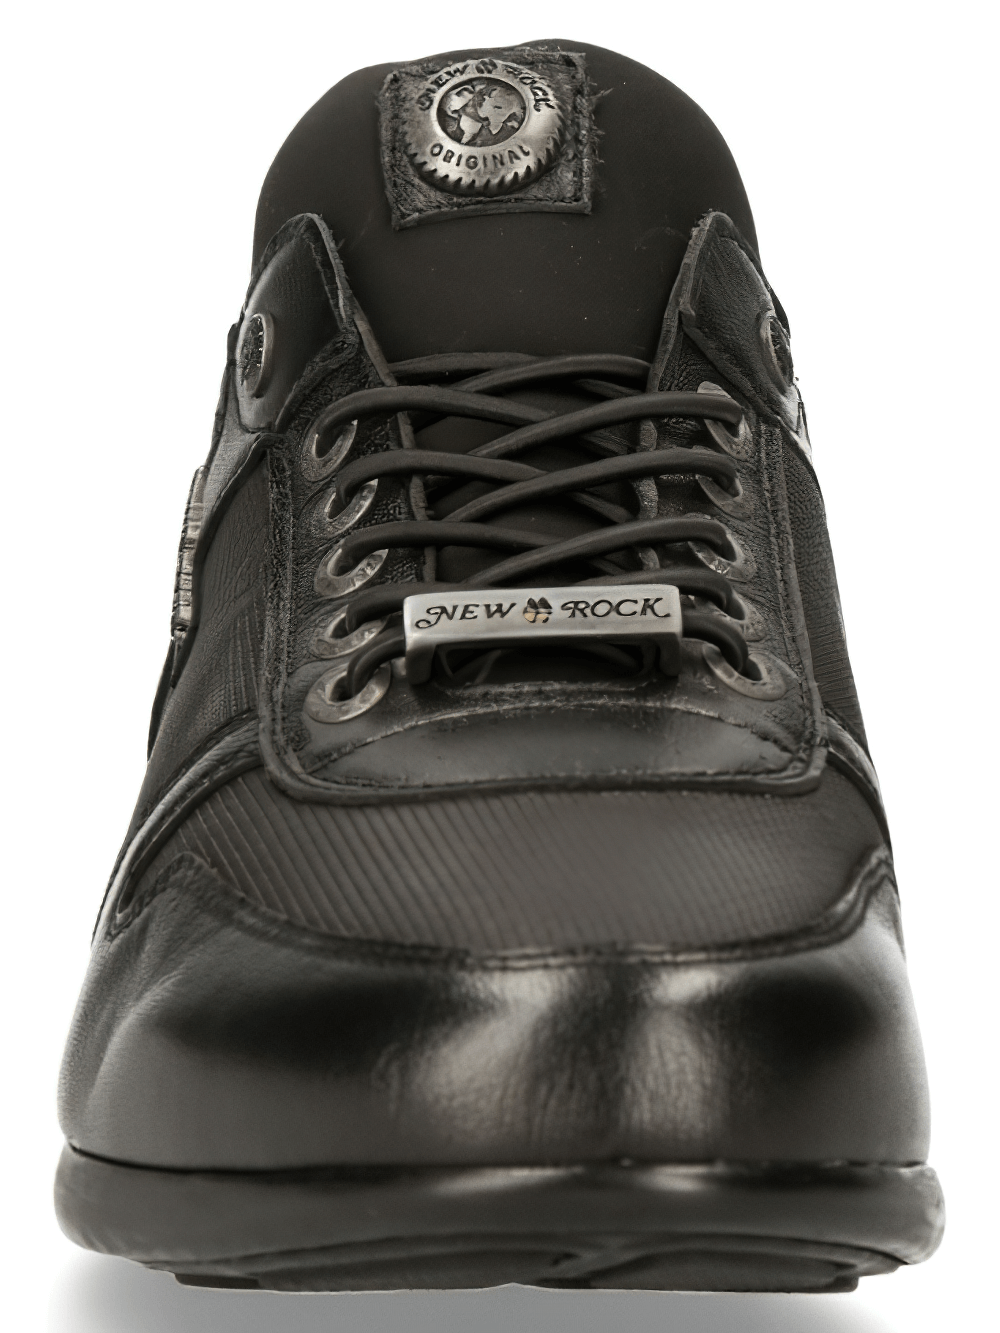 NEW ROCK Punk Genuine Leather Sneakers for Fashion Rebels